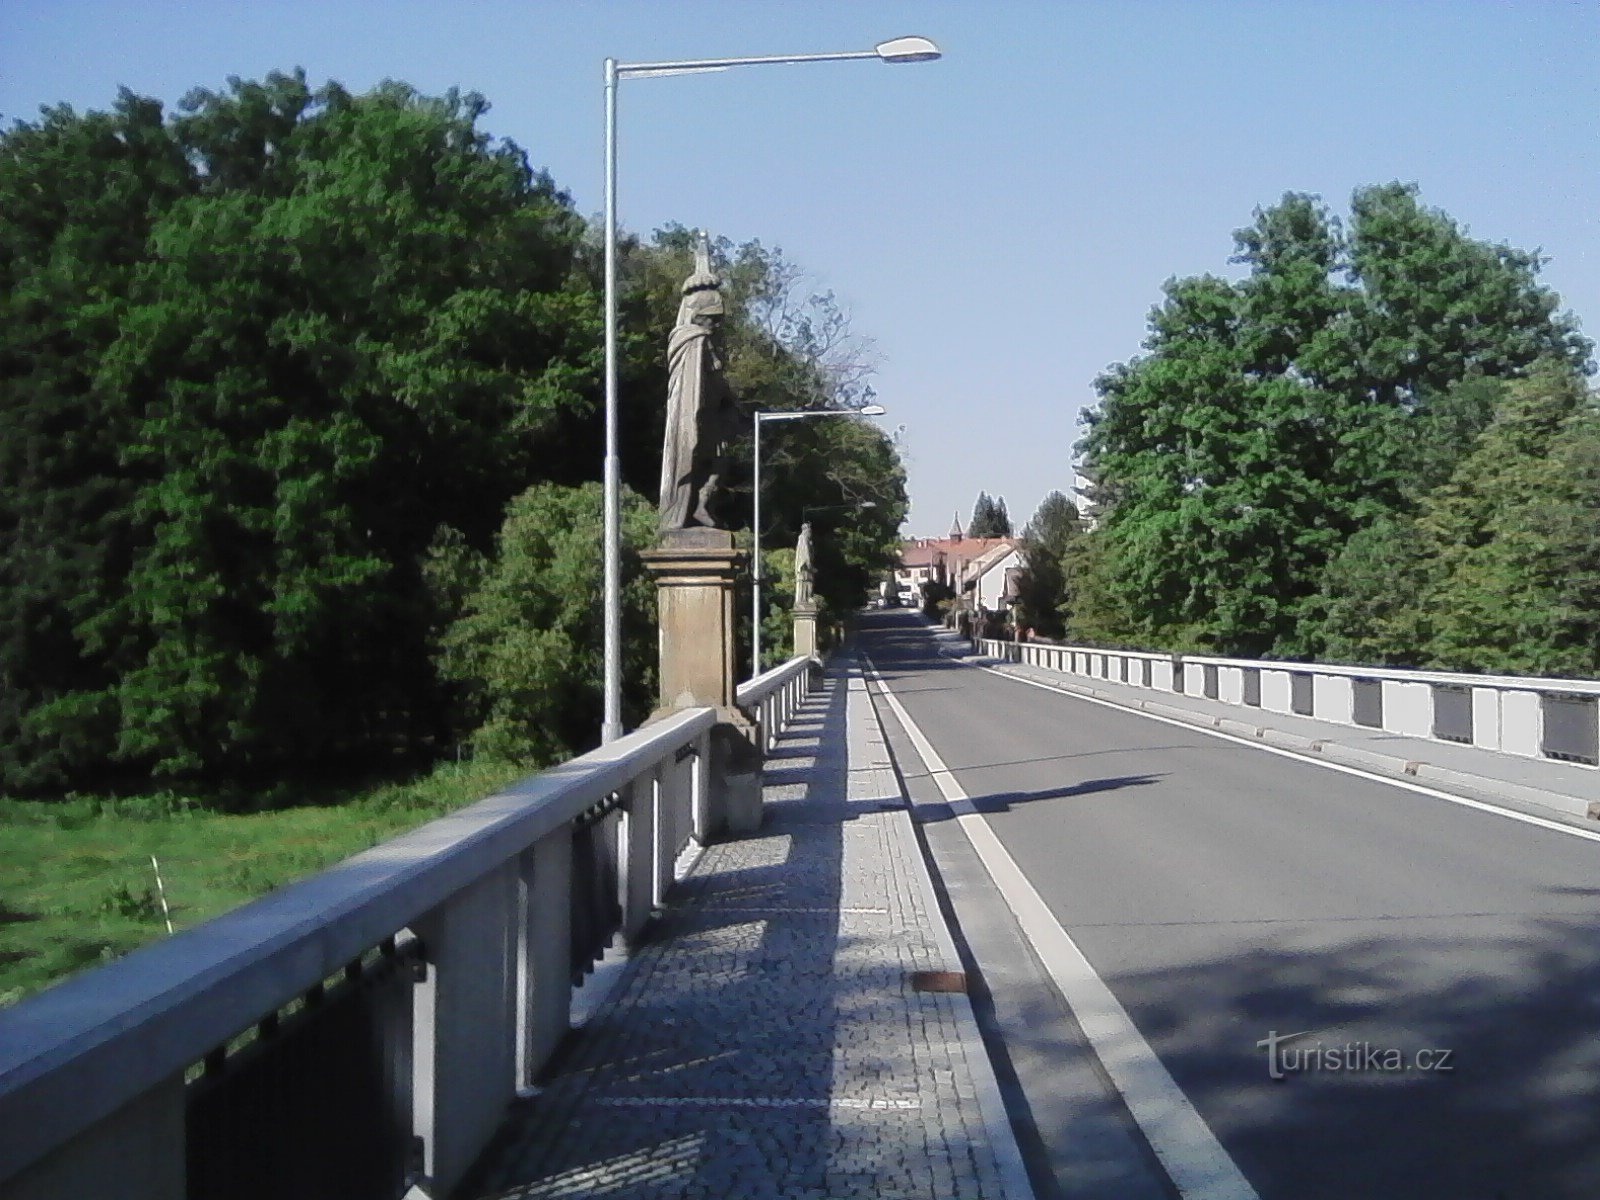 1. Karel Burka's empire bridge from Sedlce to Prčice with statues of St. Florian and St.